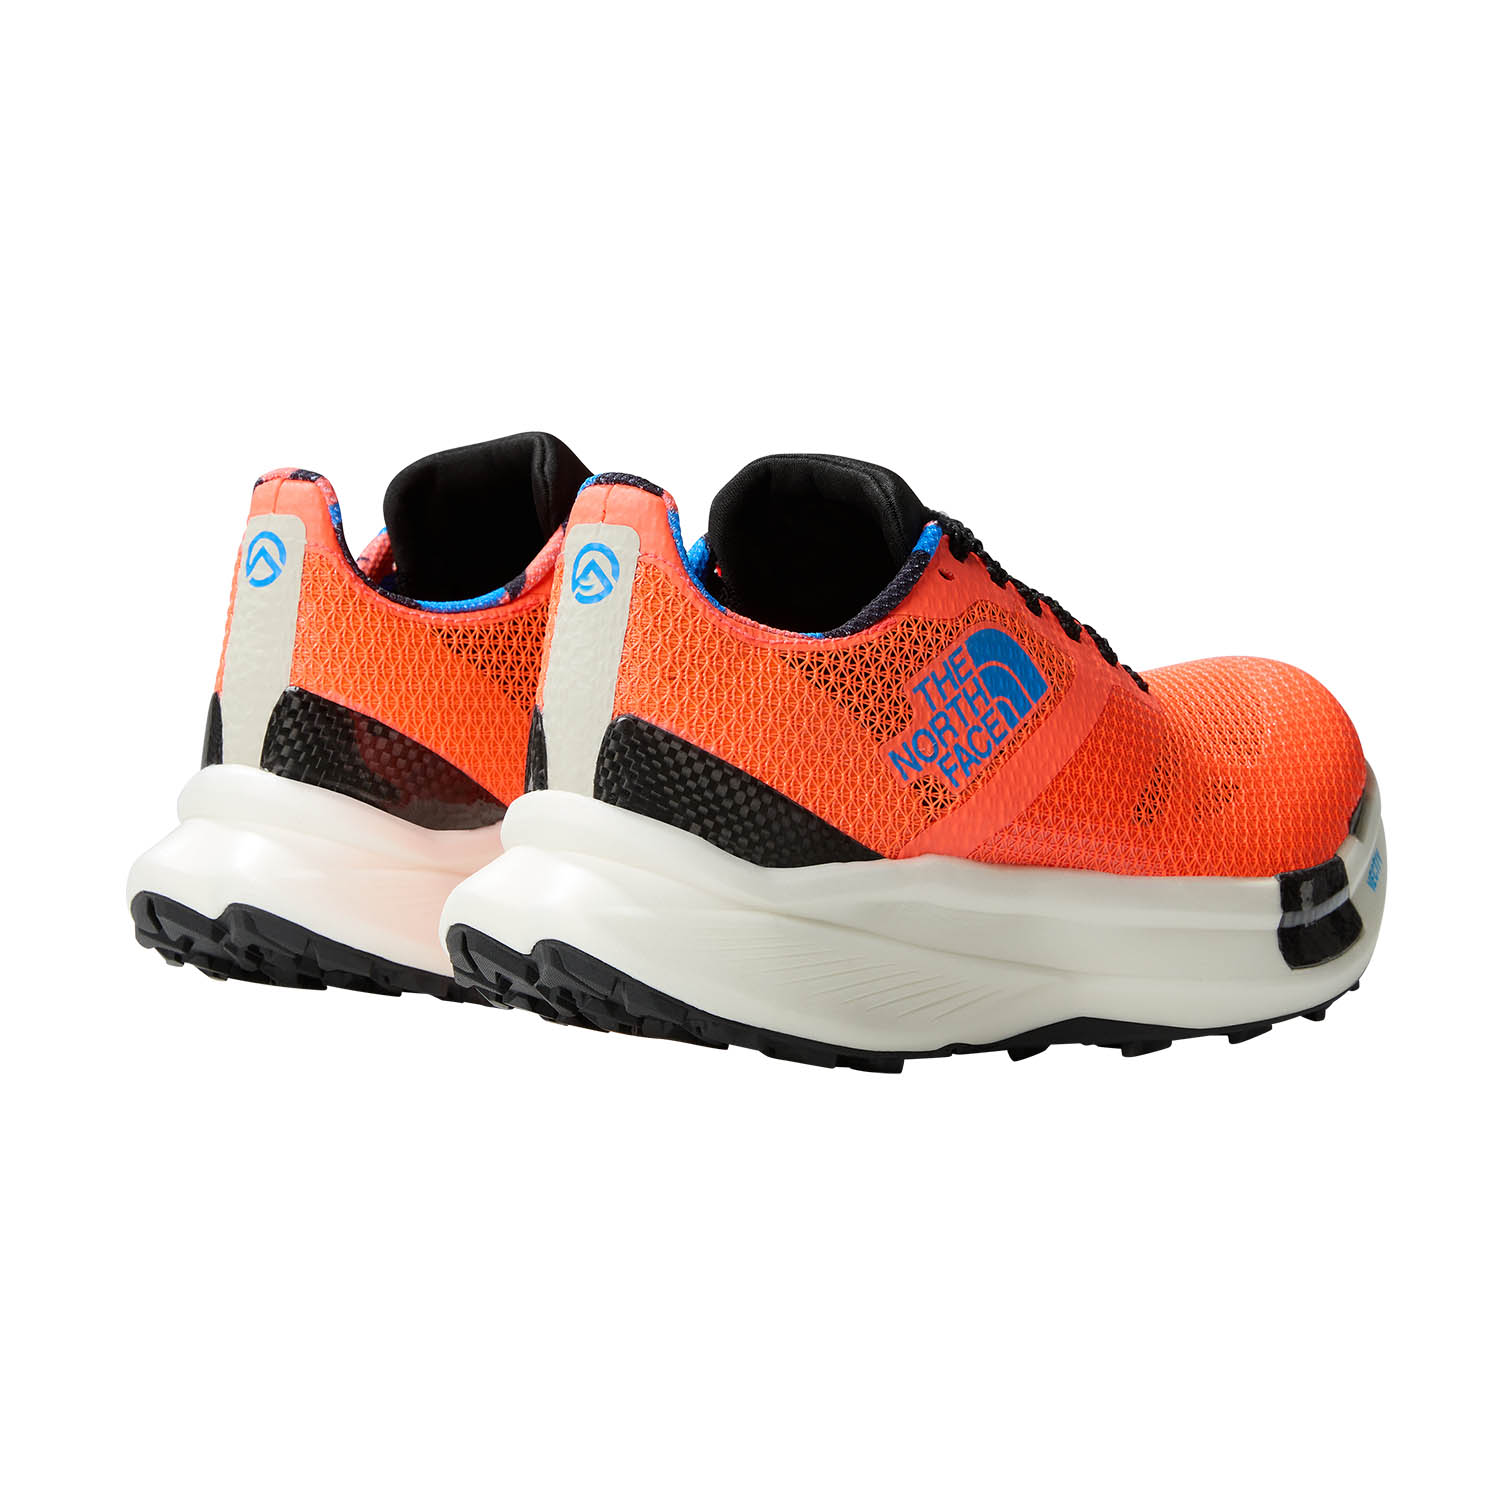 The North Face Summit Vectiv Pro - Solar Coral/Optic Blue